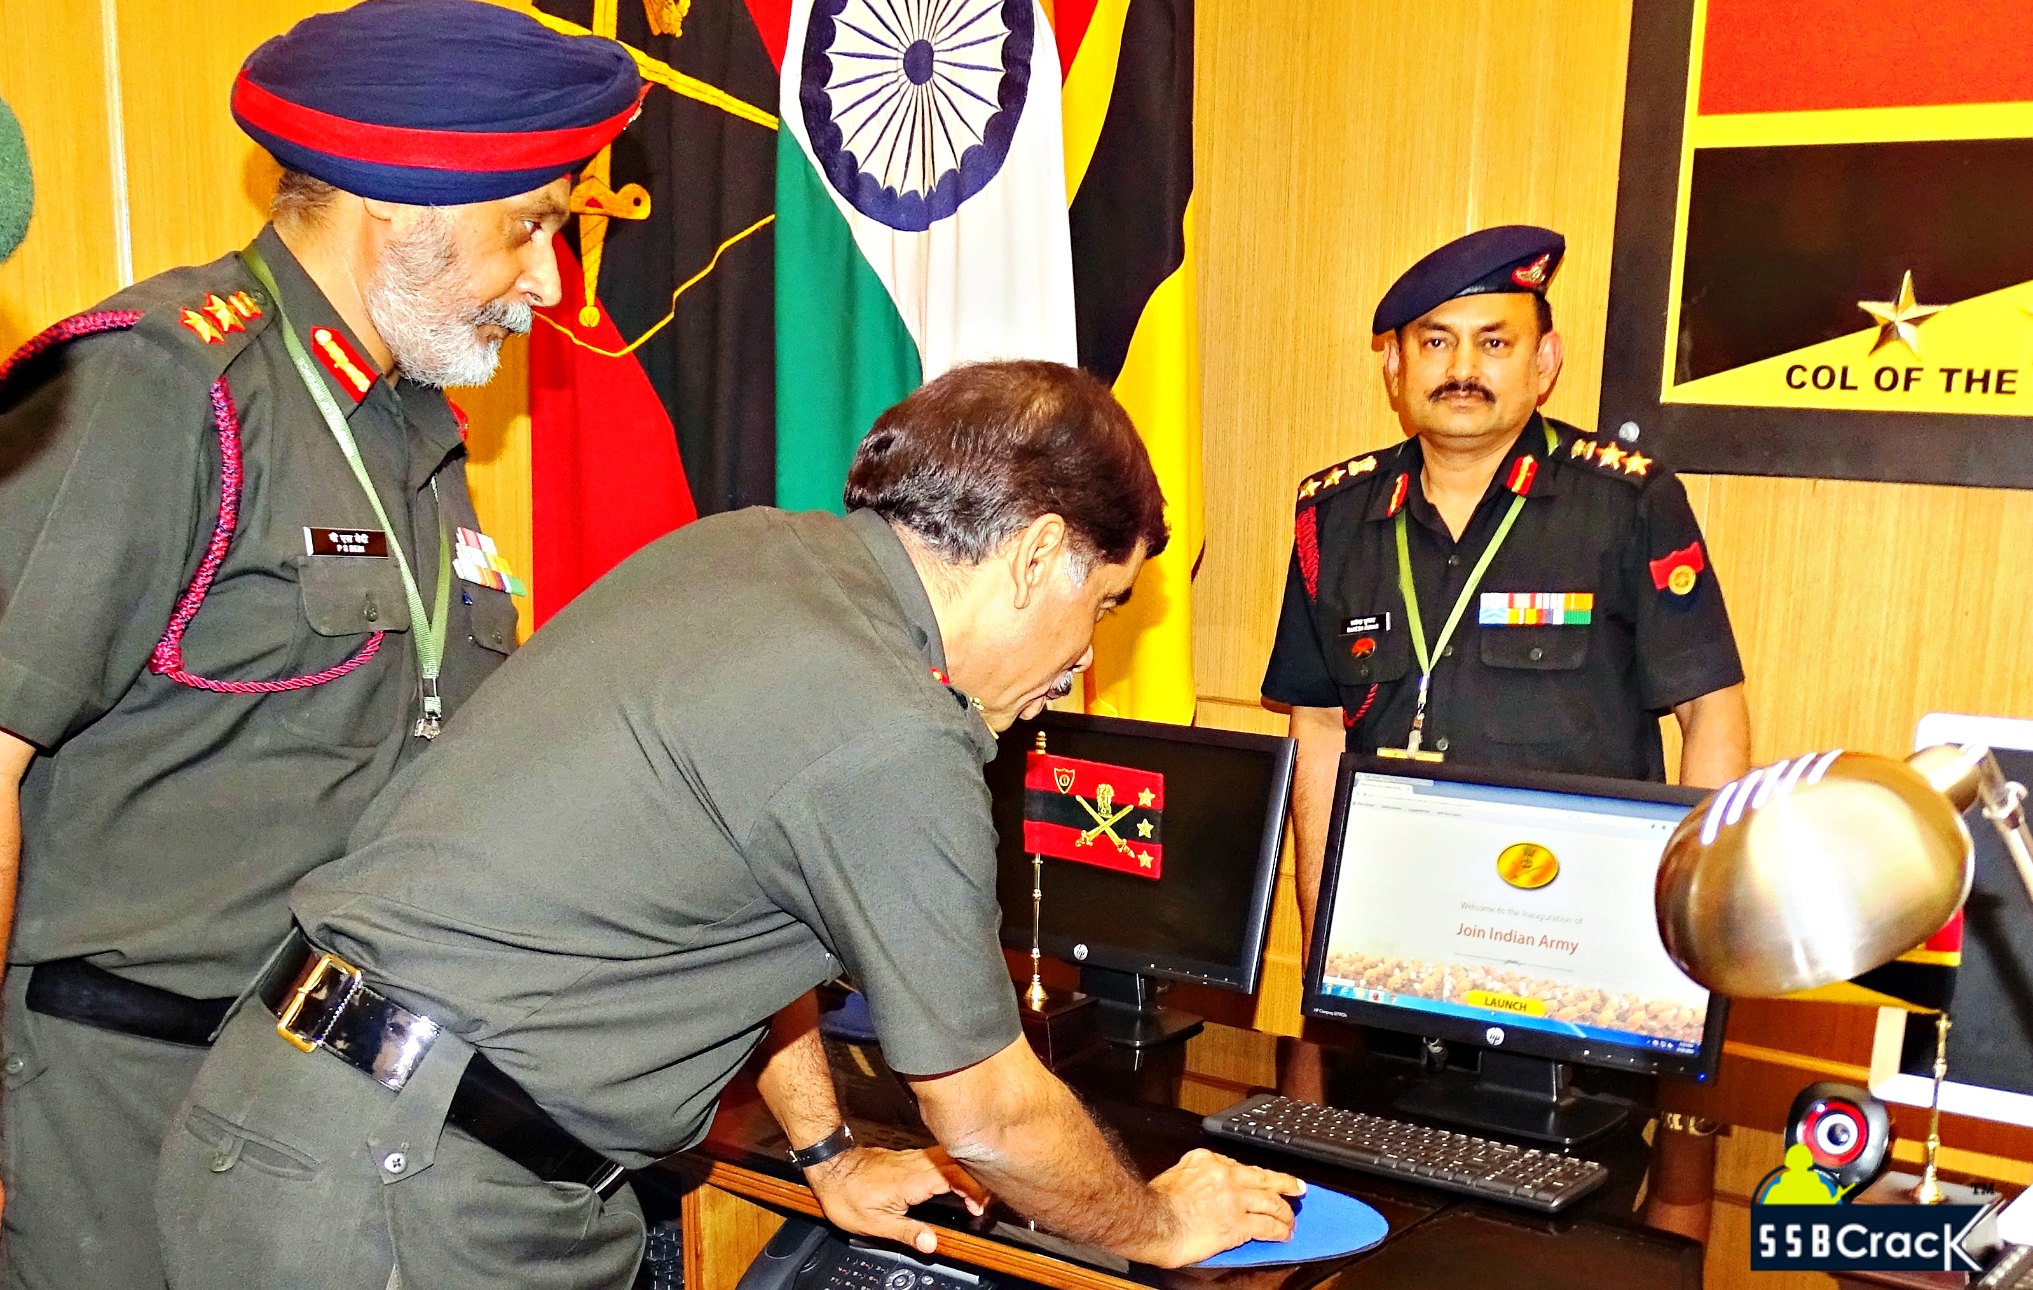 new joinindianarmy.nic.in website